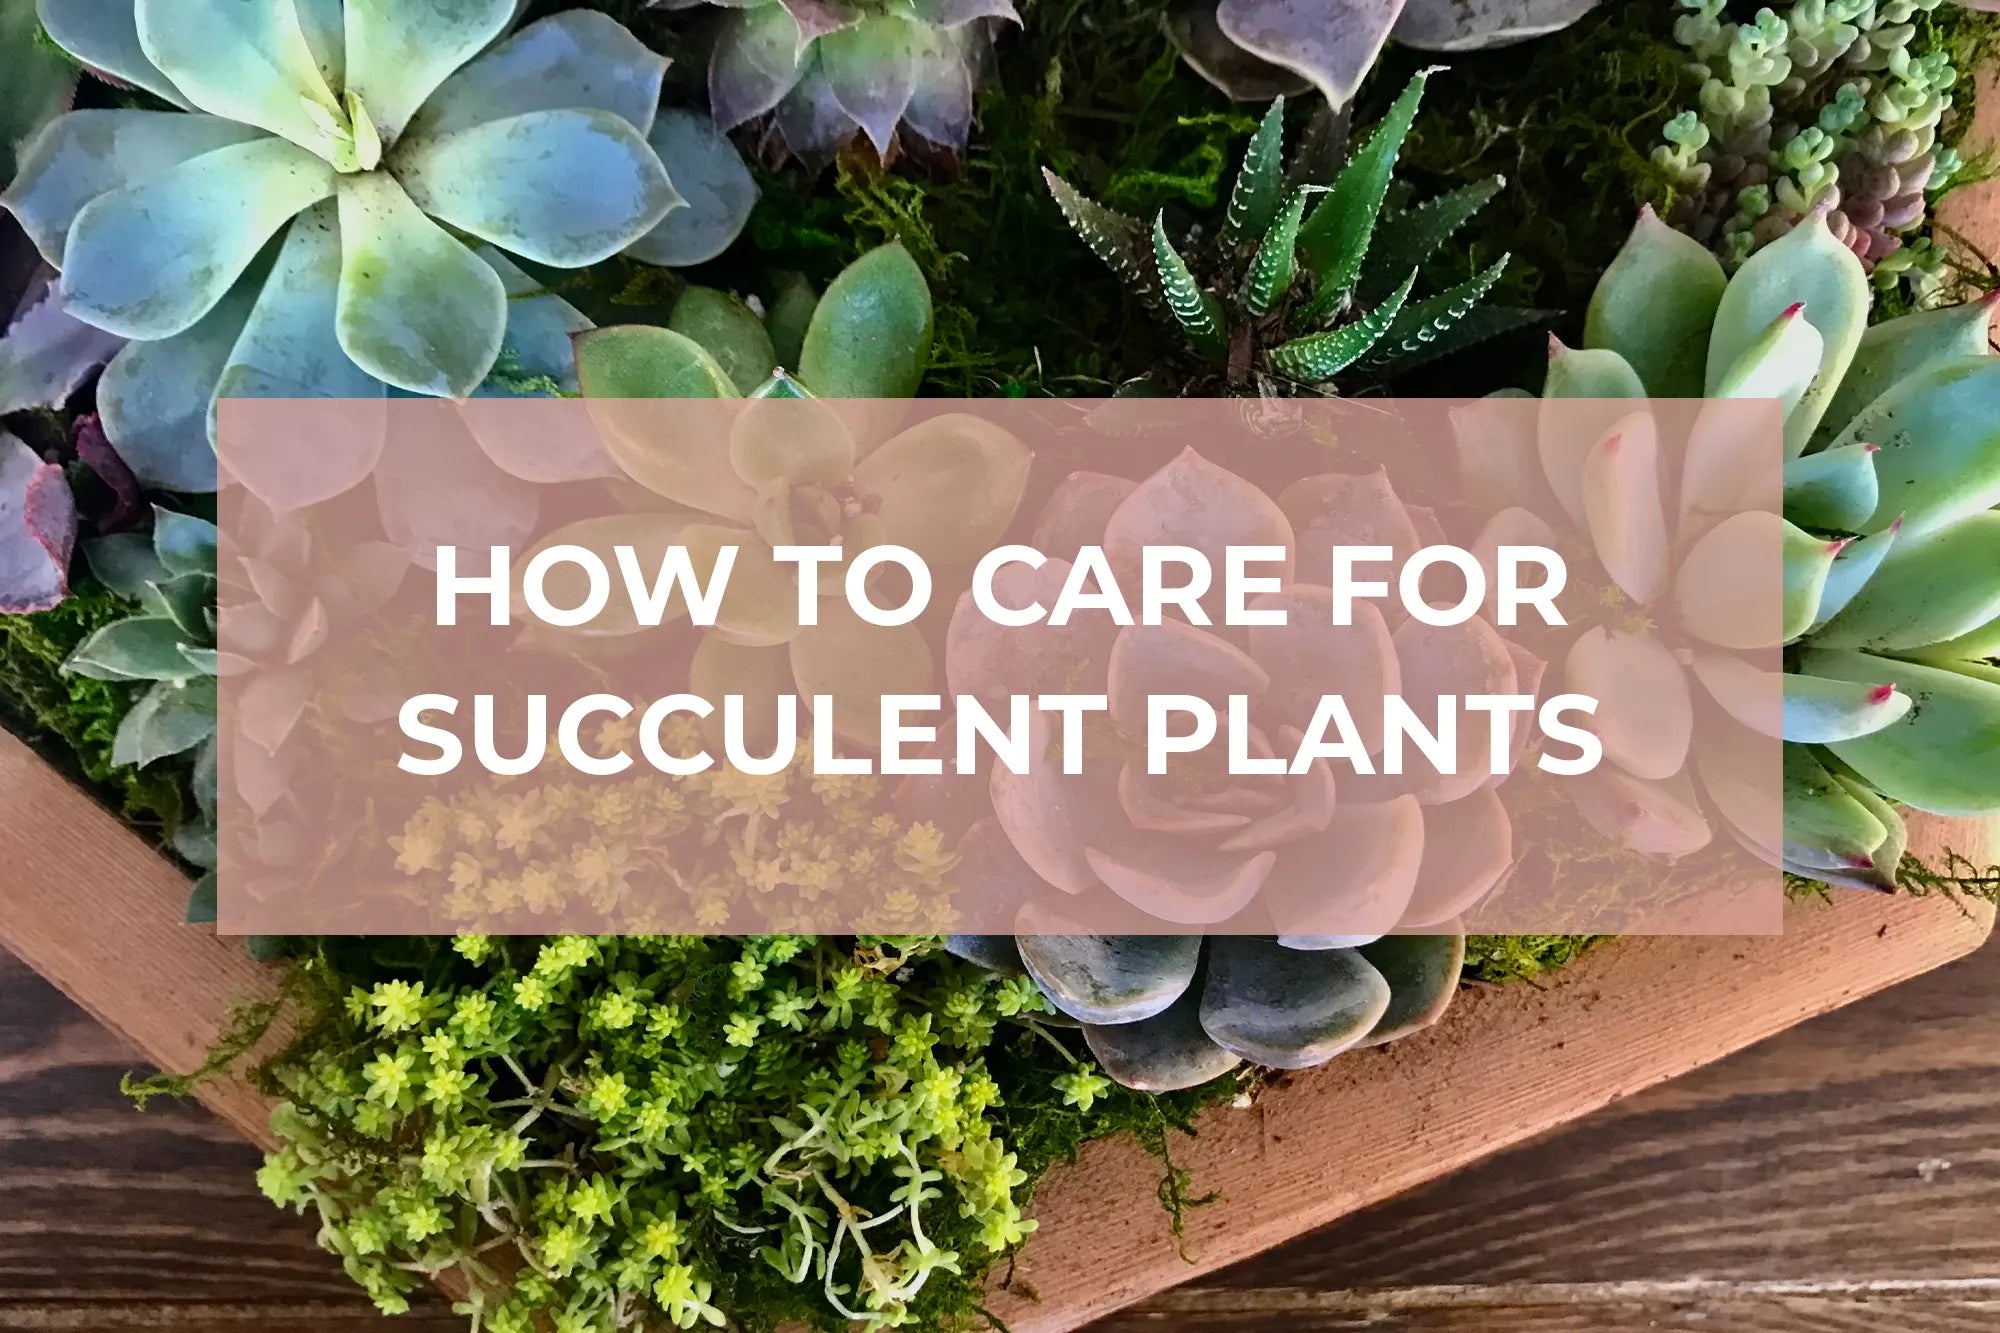 How To Care for Succulent Plants